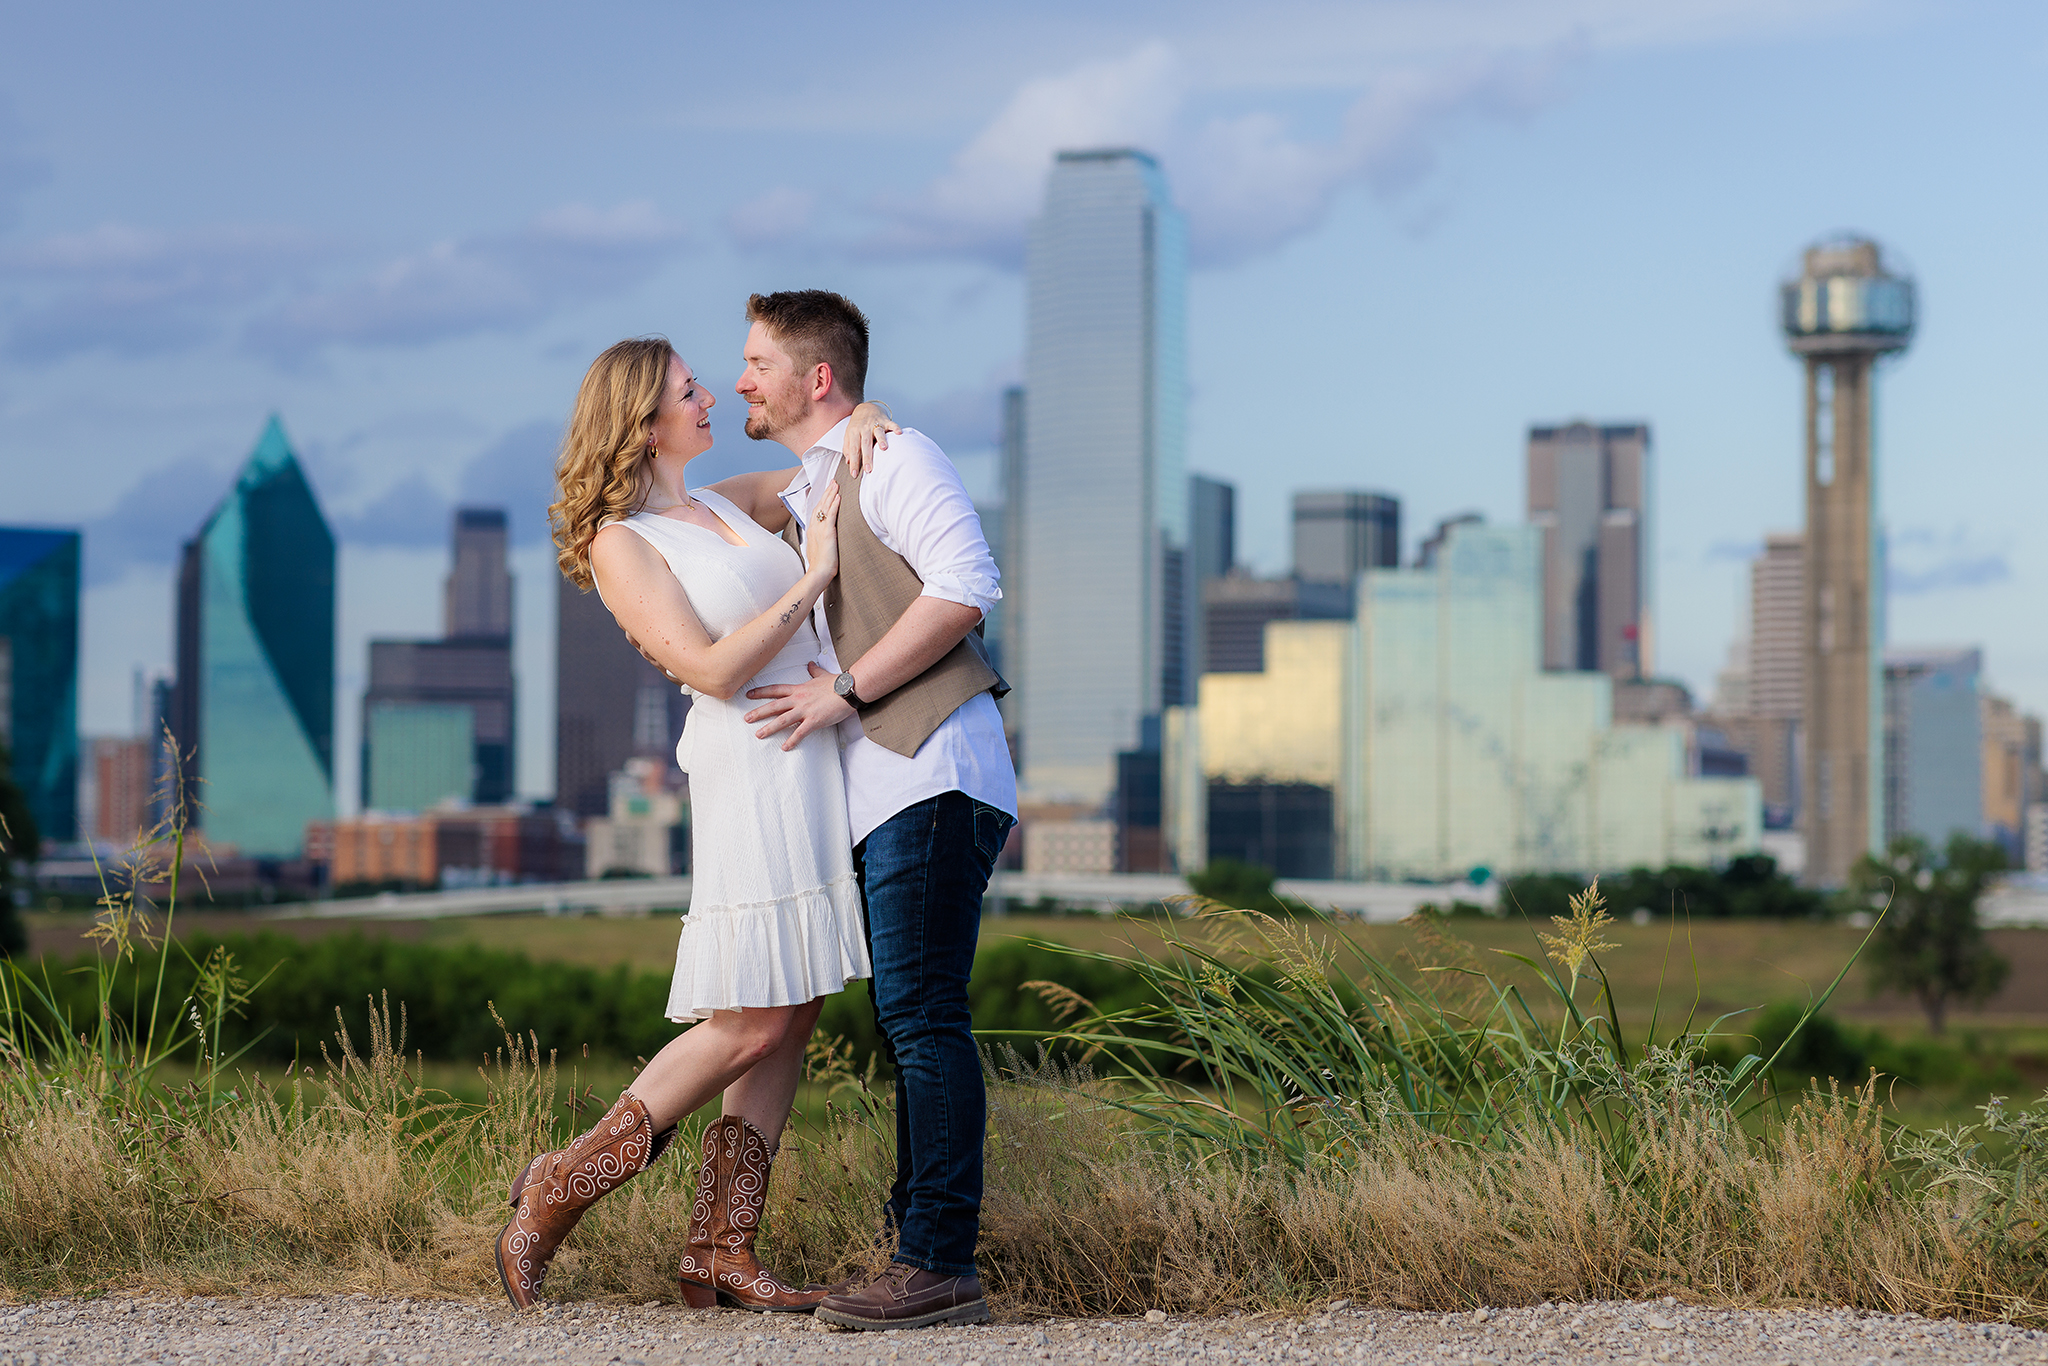 Dallas wedding photographer captures couple hugging and dipping while smiling at Trinity Overlook Park